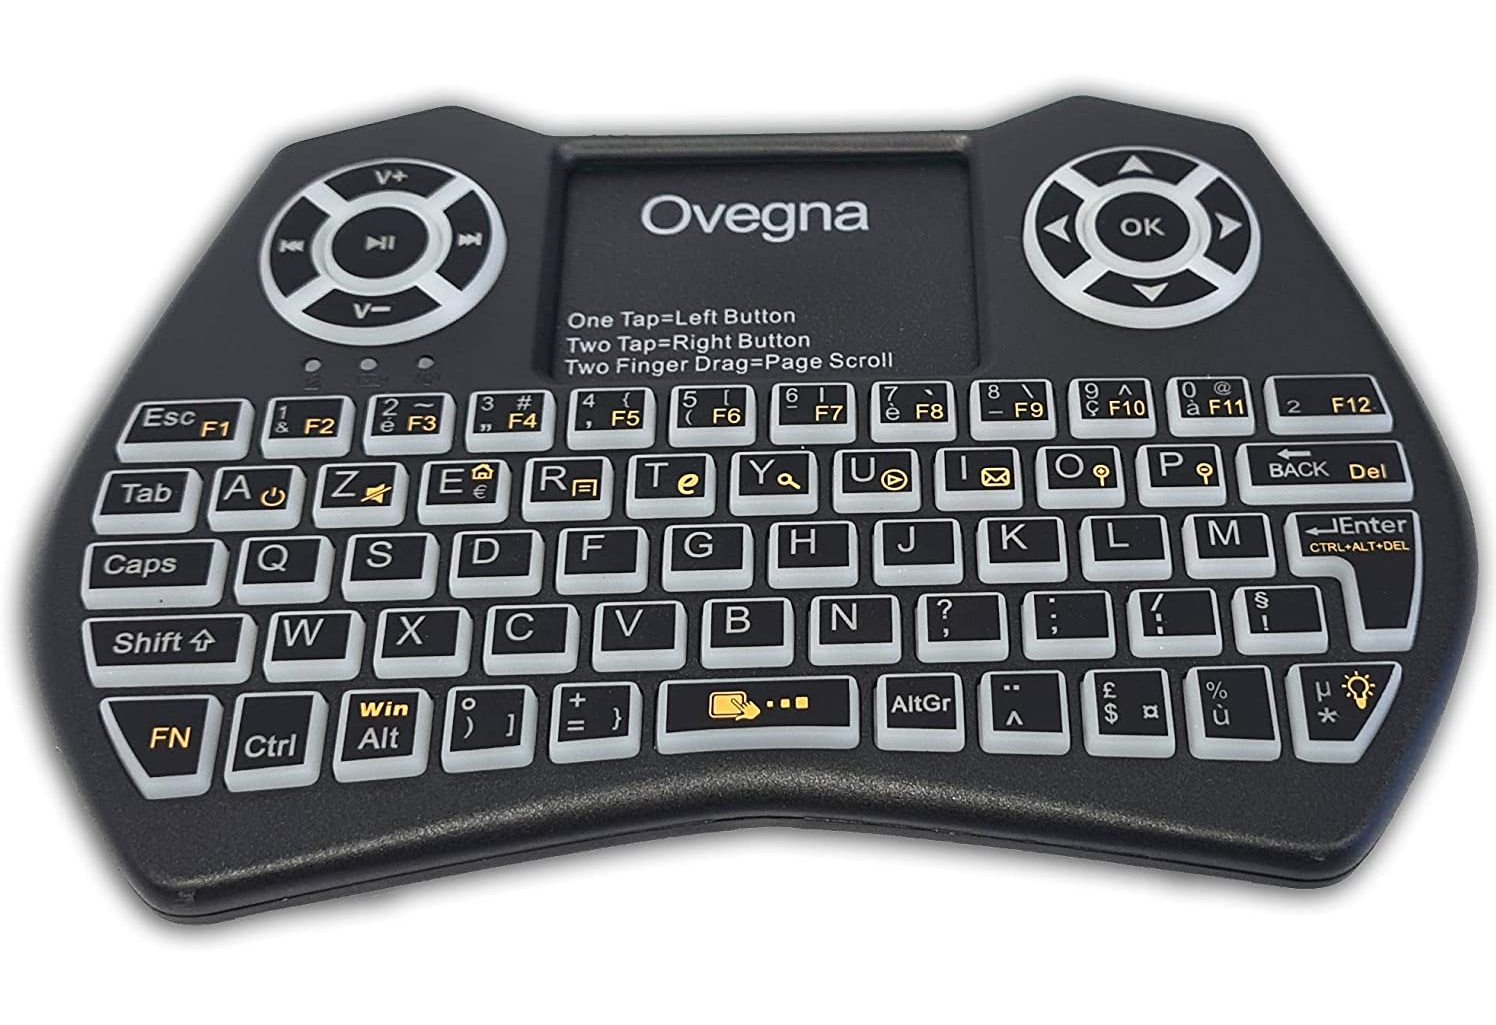 Ovegna i9: Wireless Mini Keyboard (AZERTY) 2.4GHz Wireless Touchpad Battery RGB Backlight for Smart TV, PC, Mini PC, Mac, Raspberry PI 2/3/4, Consoles, Laptop and Android Box 